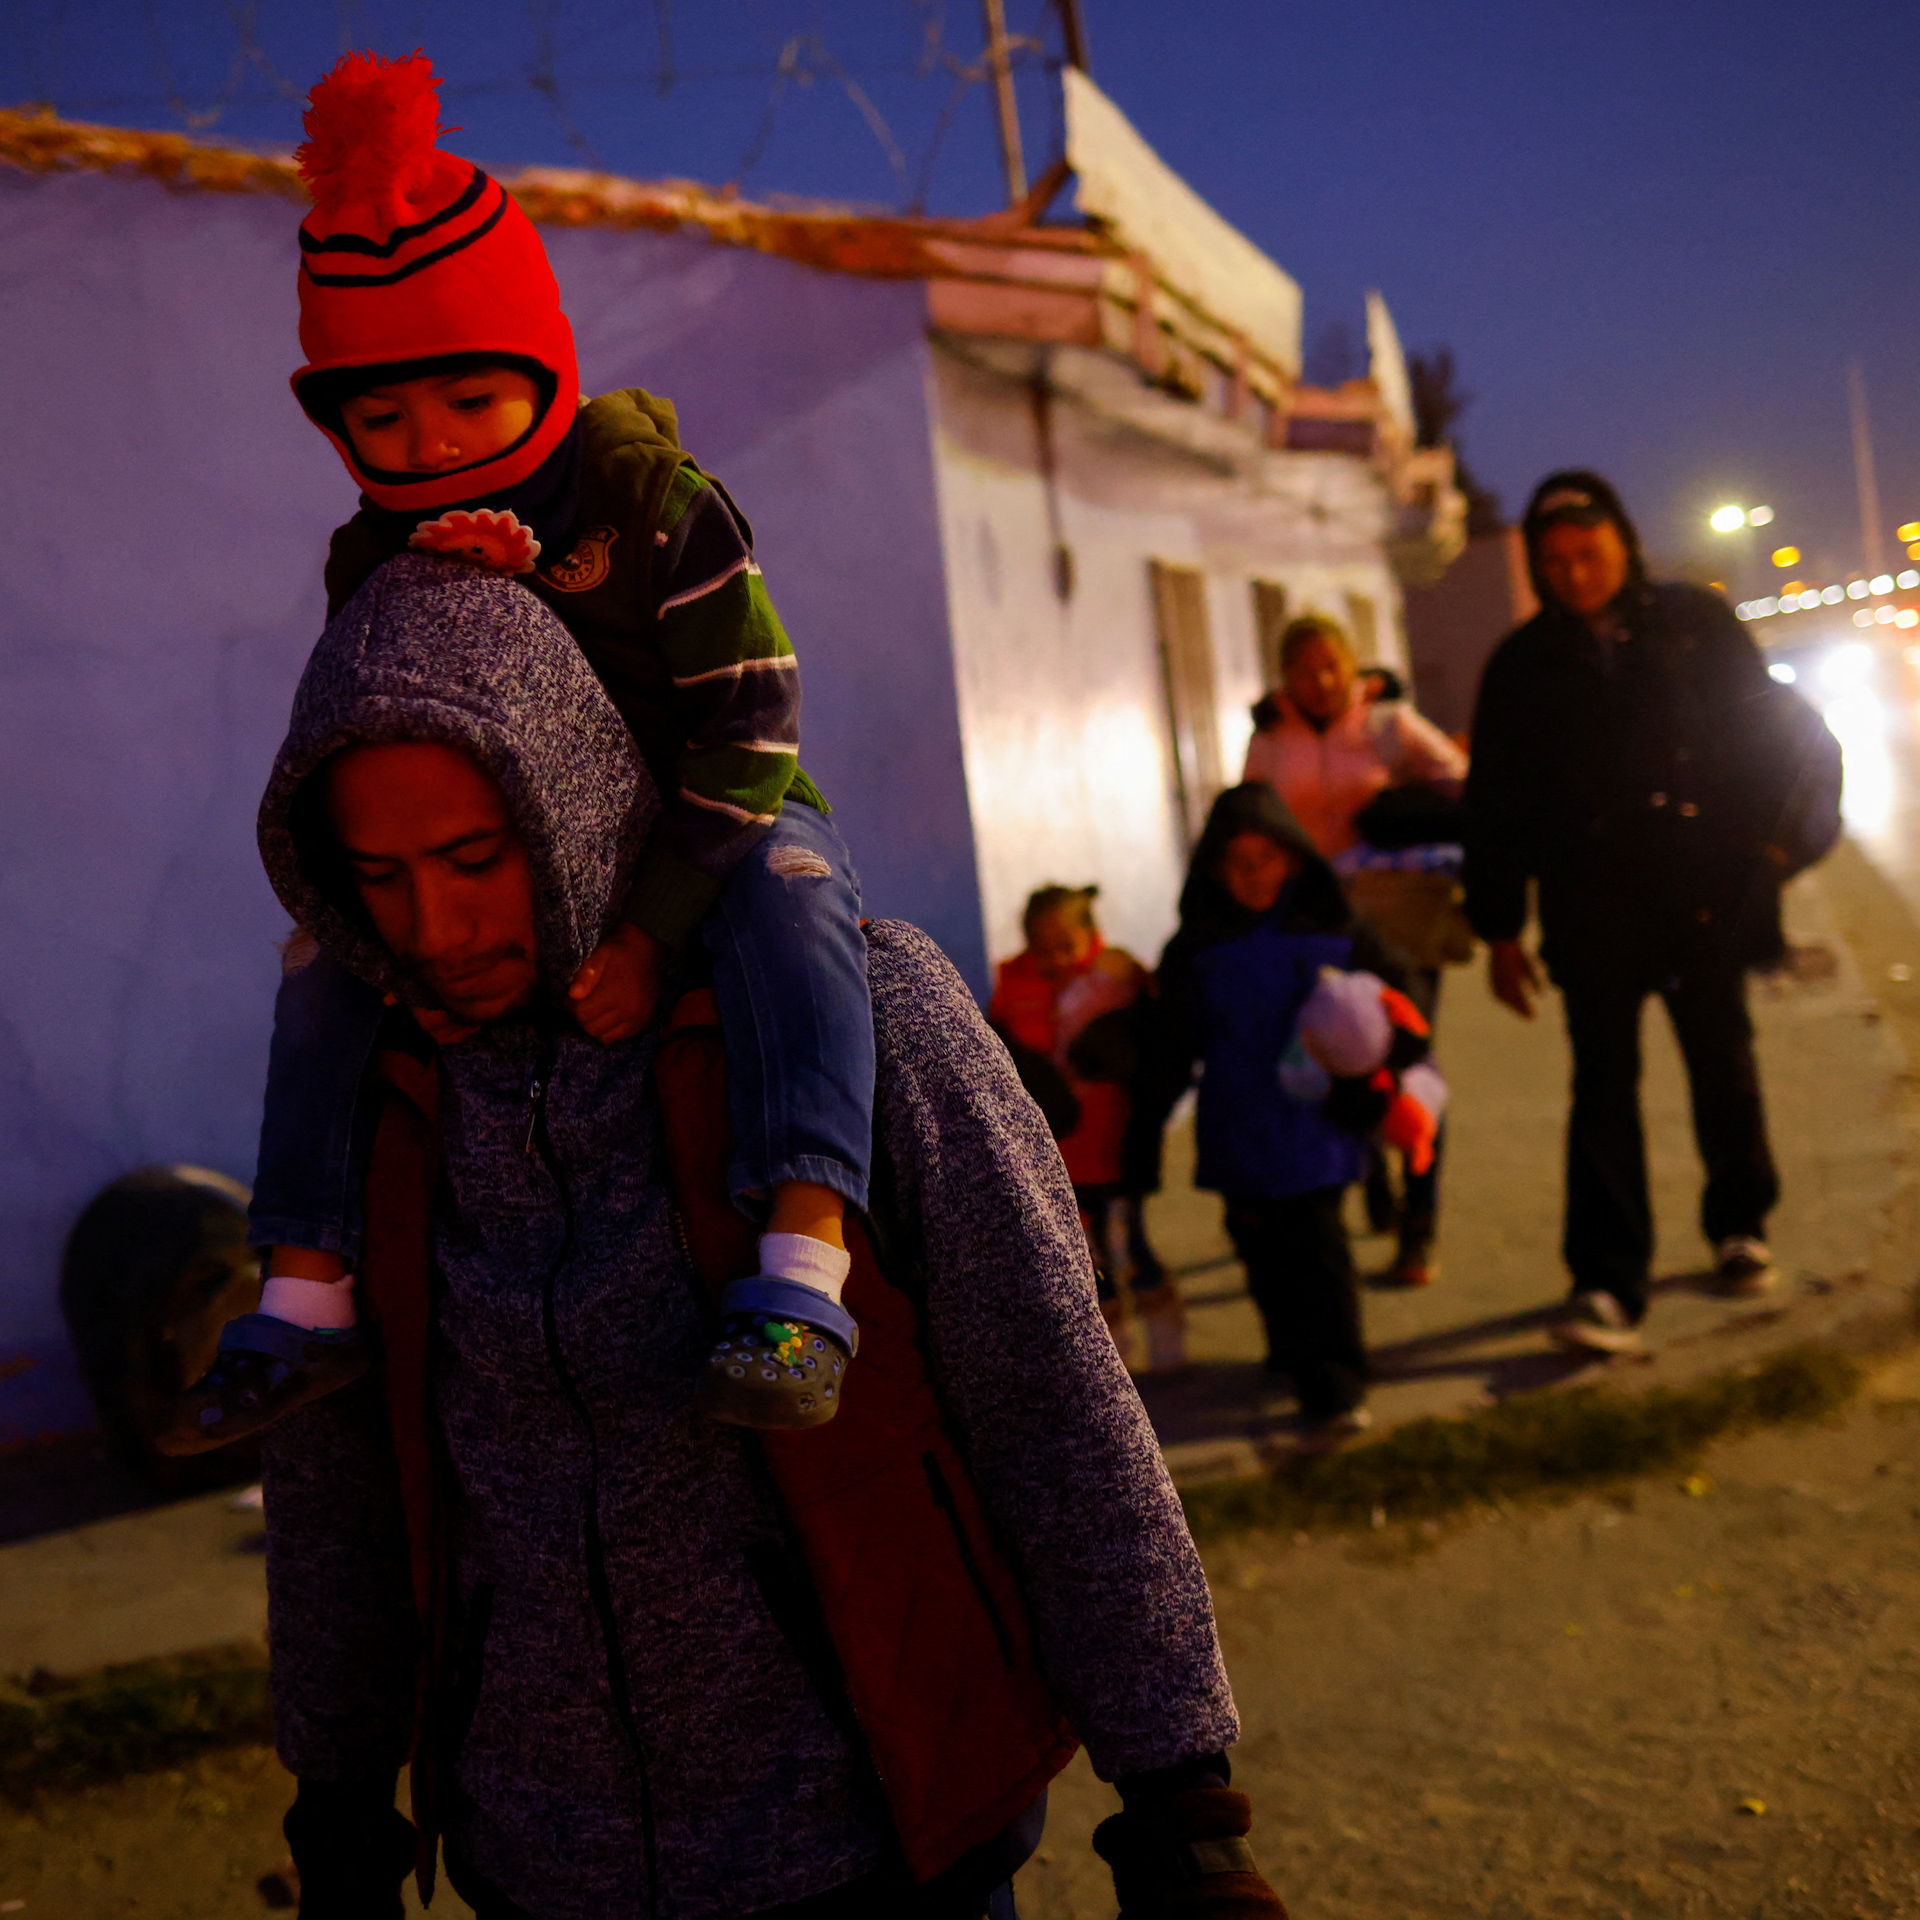 Why are some migrant families forced to split at the U.S.-Mexico border?